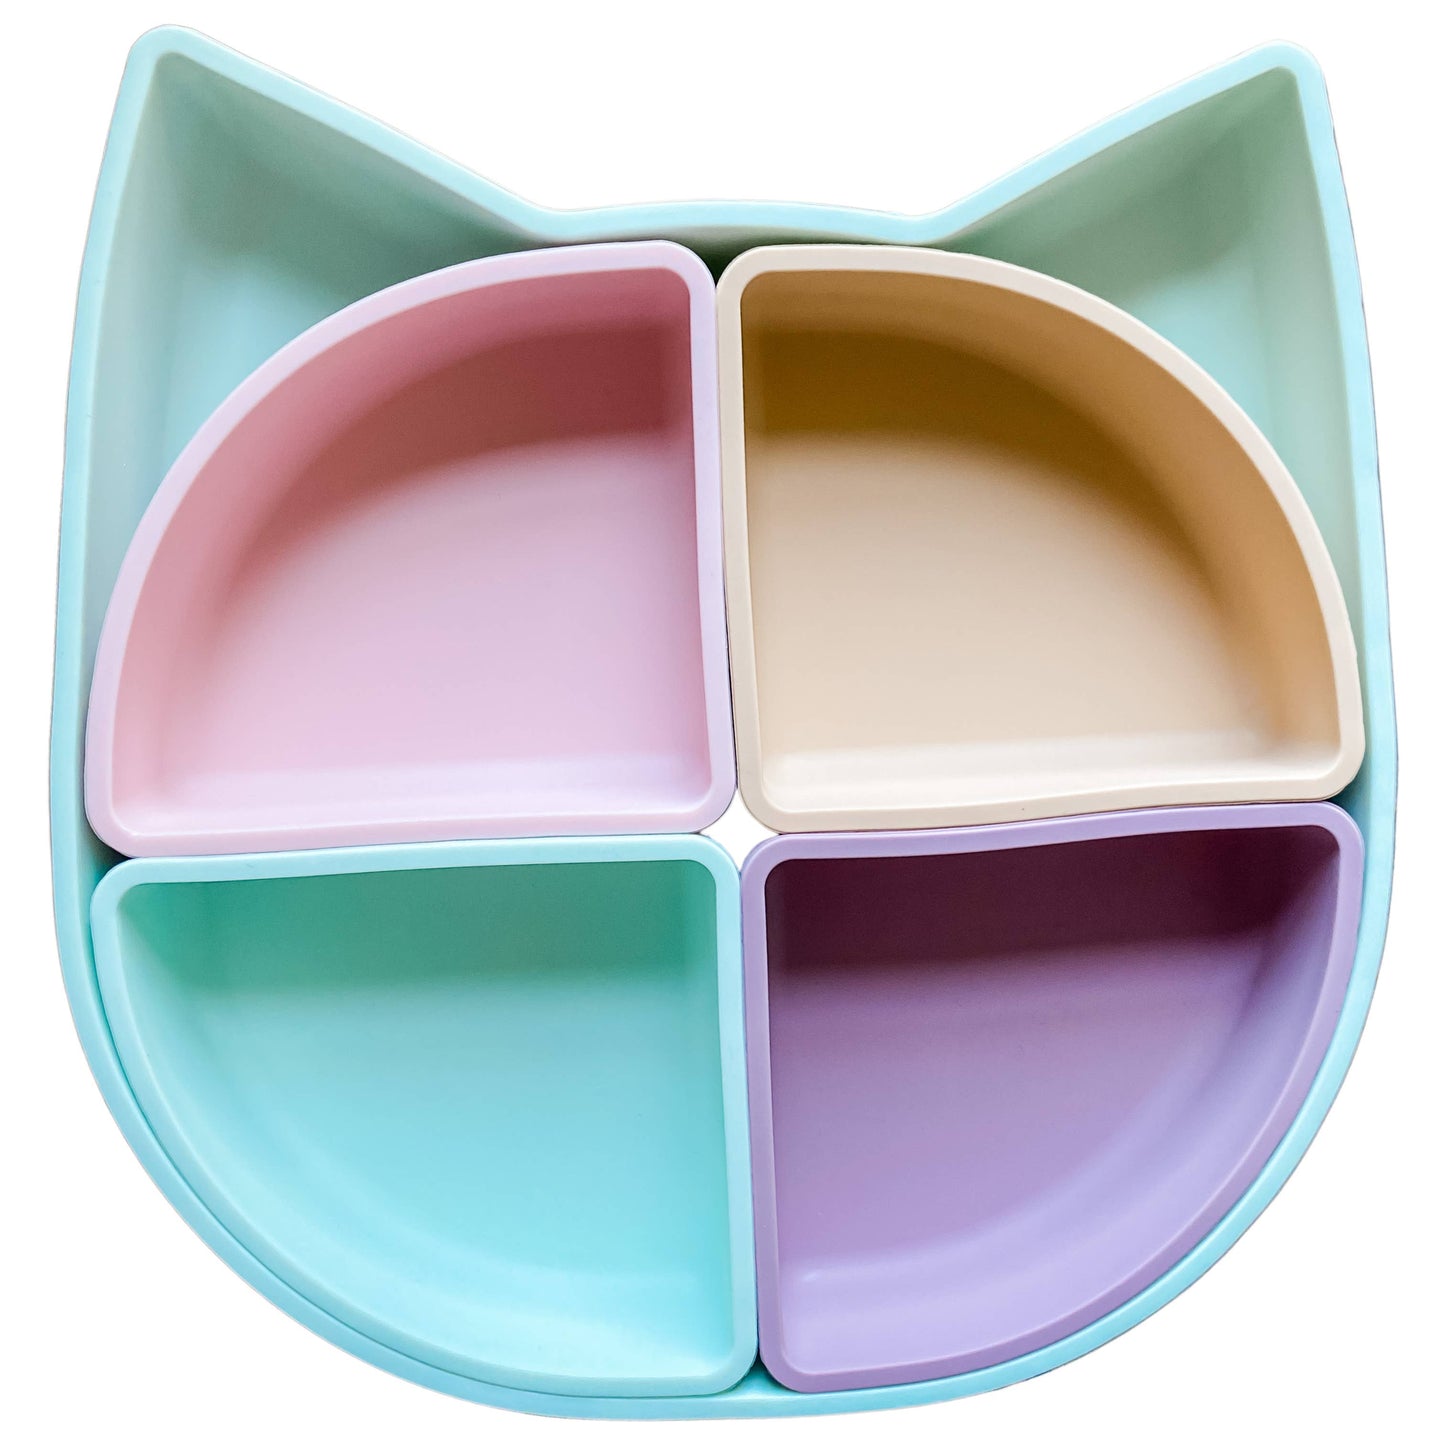 Cat Divided Plate (no suction) - Mint